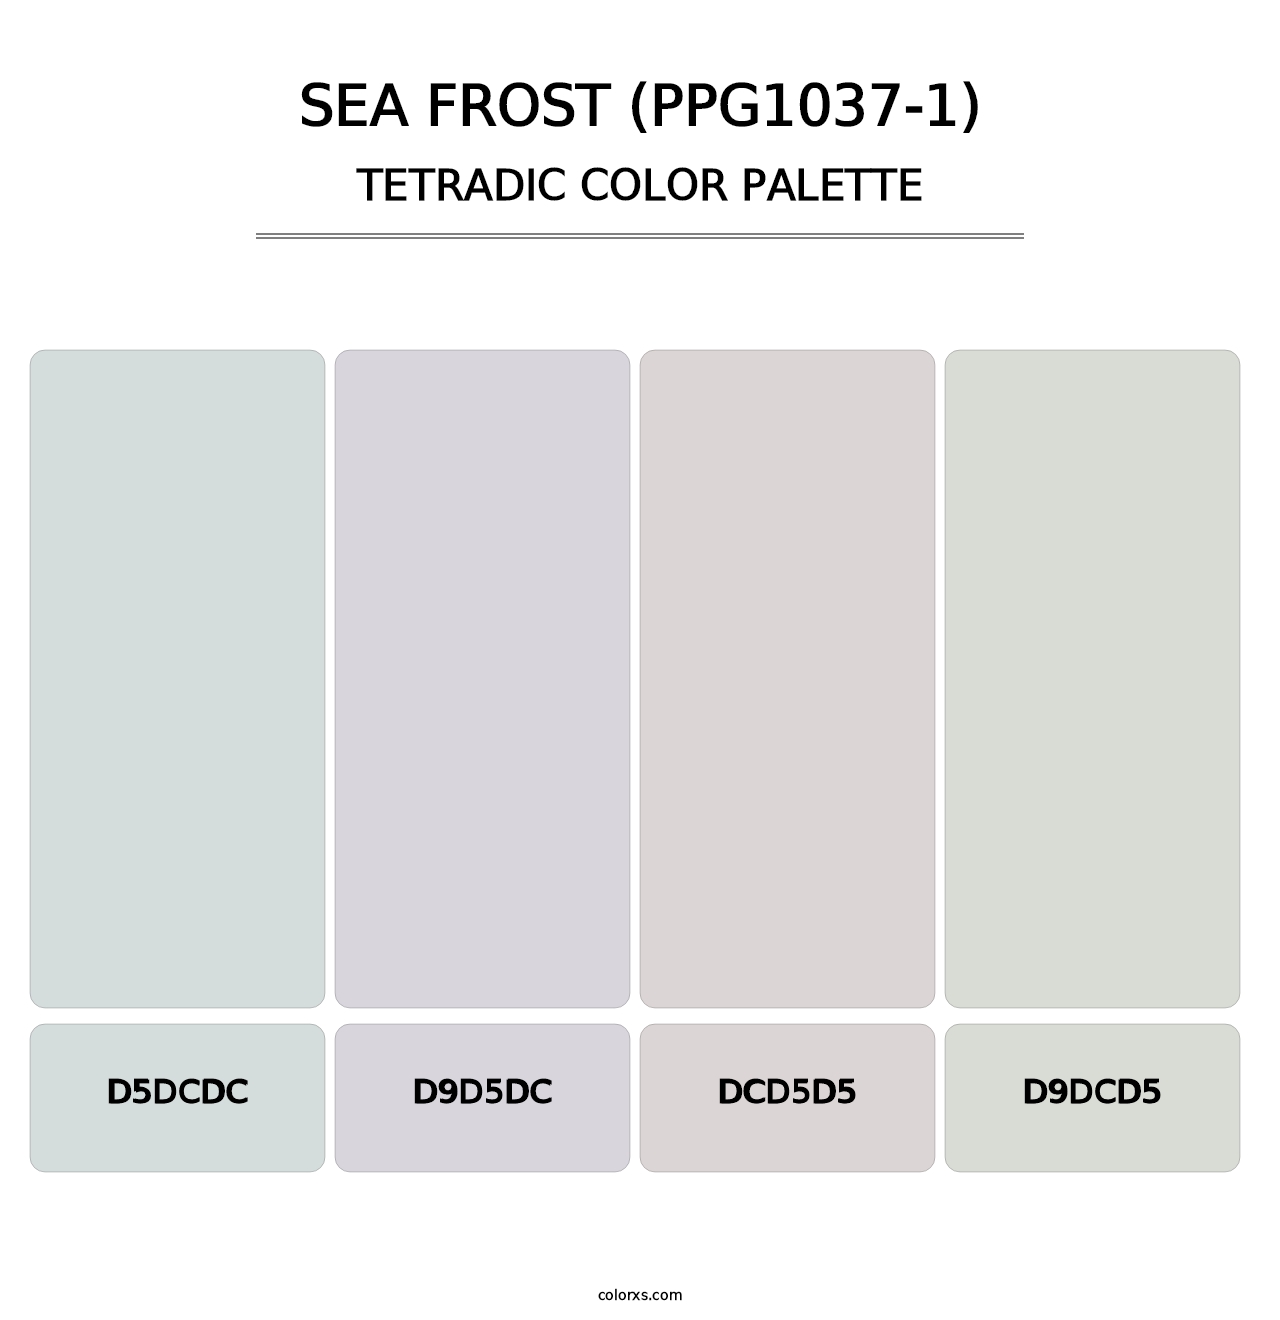 Sea Frost (PPG1037-1) - Tetradic Color Palette